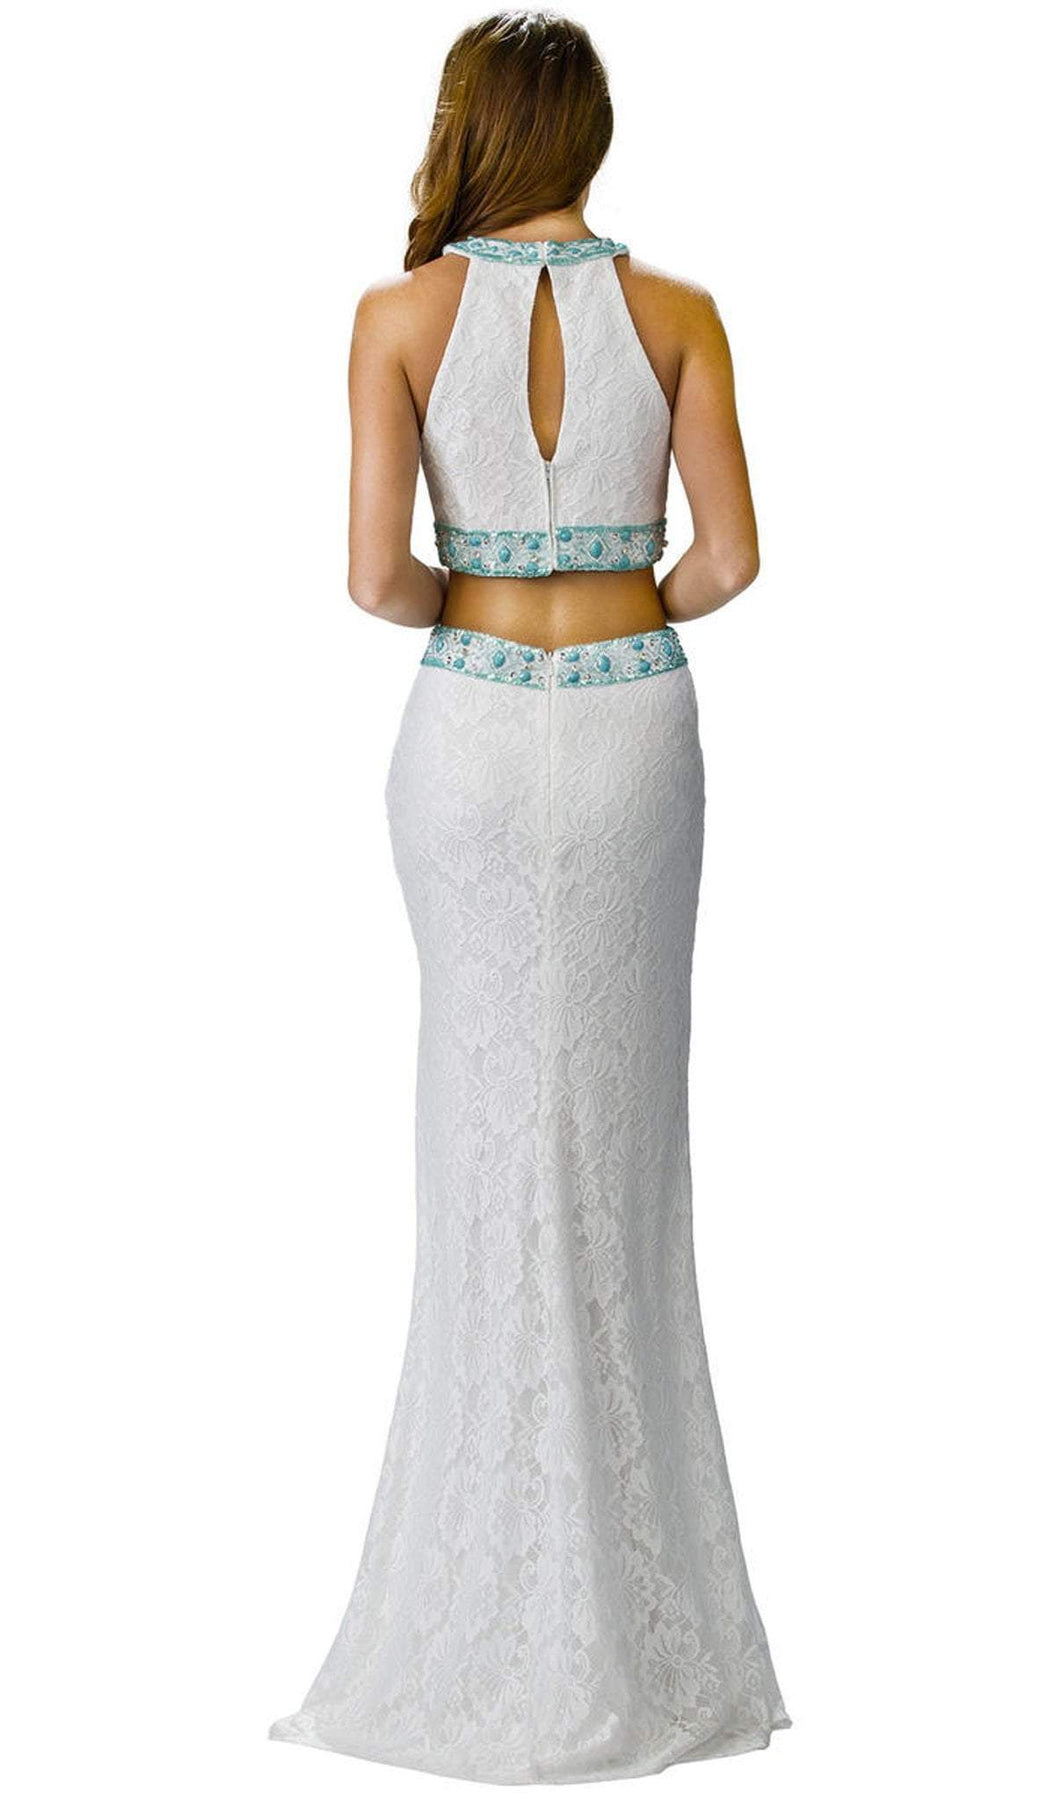 Dancing Queen - 9272 Embroidered Two Piece Formal Dress Special Occasion Dress